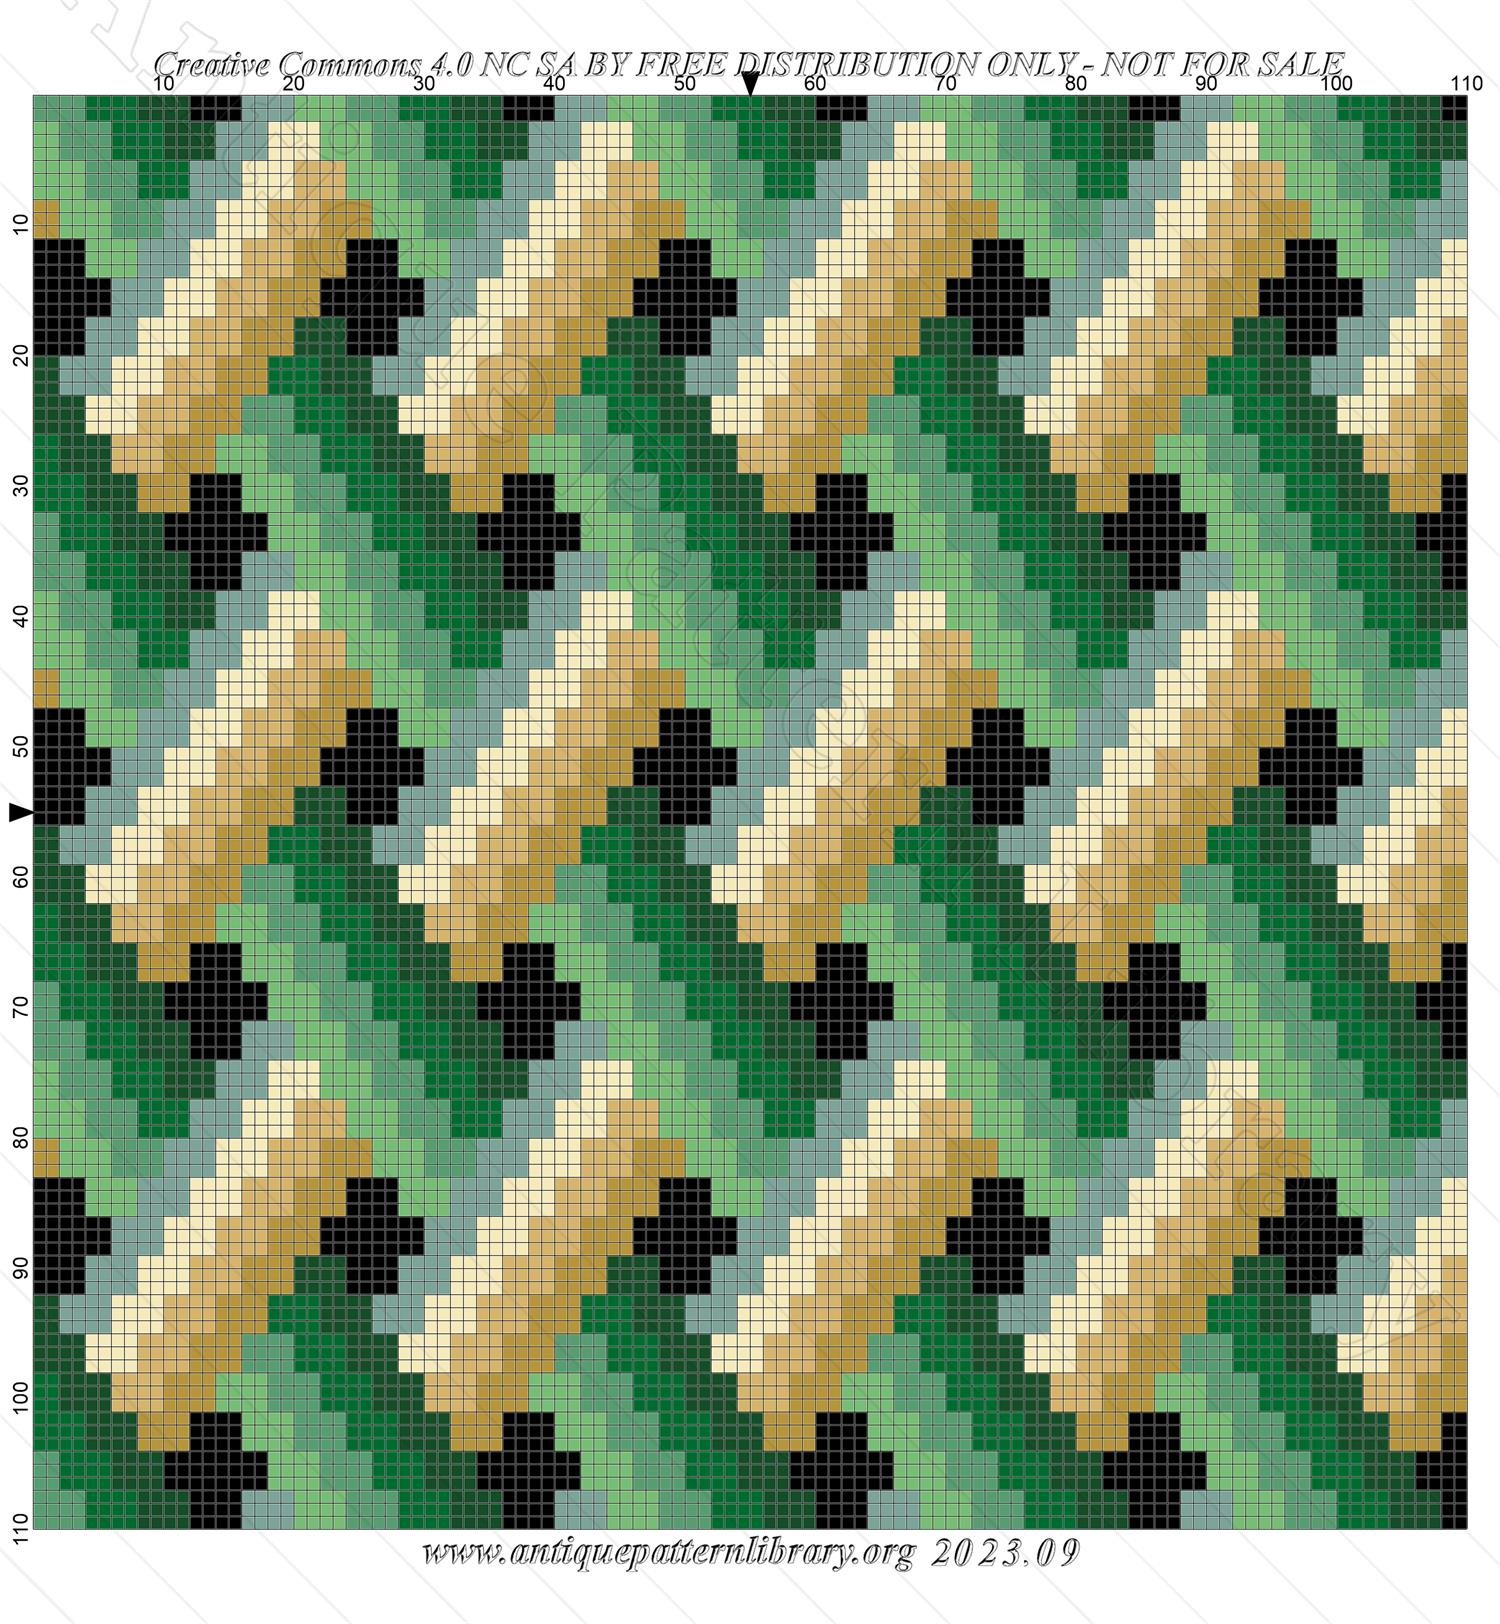 A-MH159 Simple plaited pattern